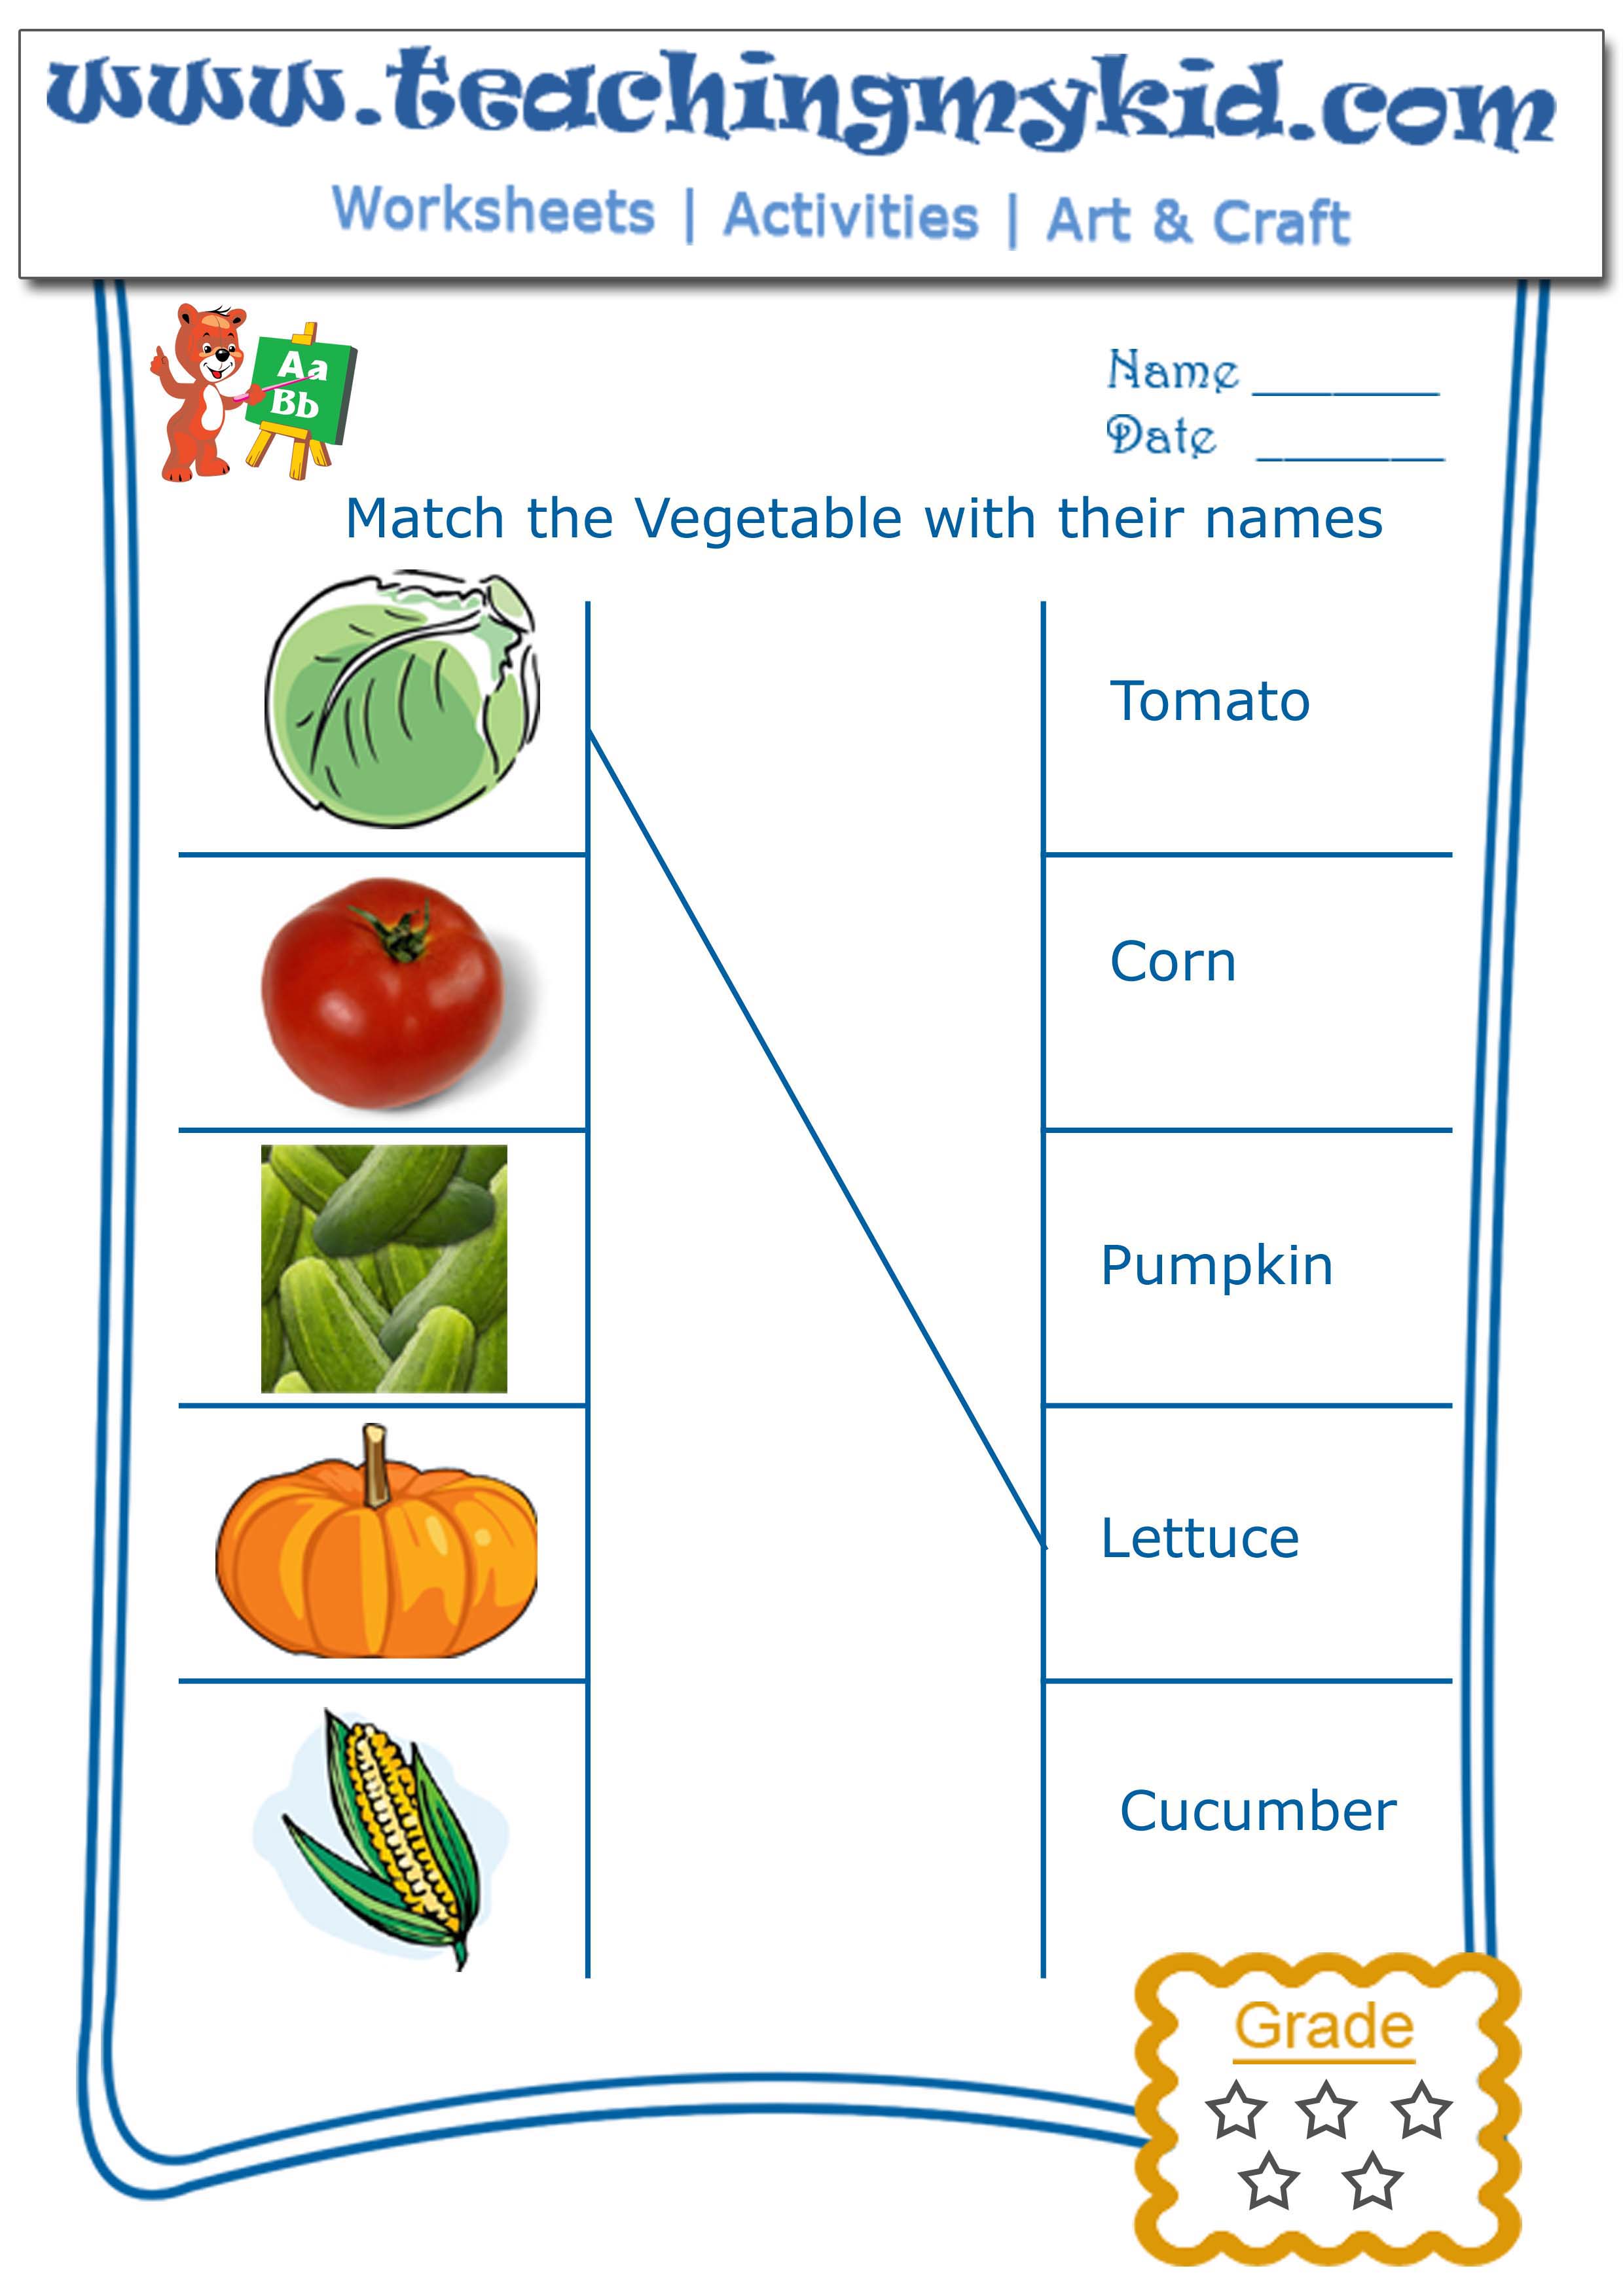 vegetables names in english for kids